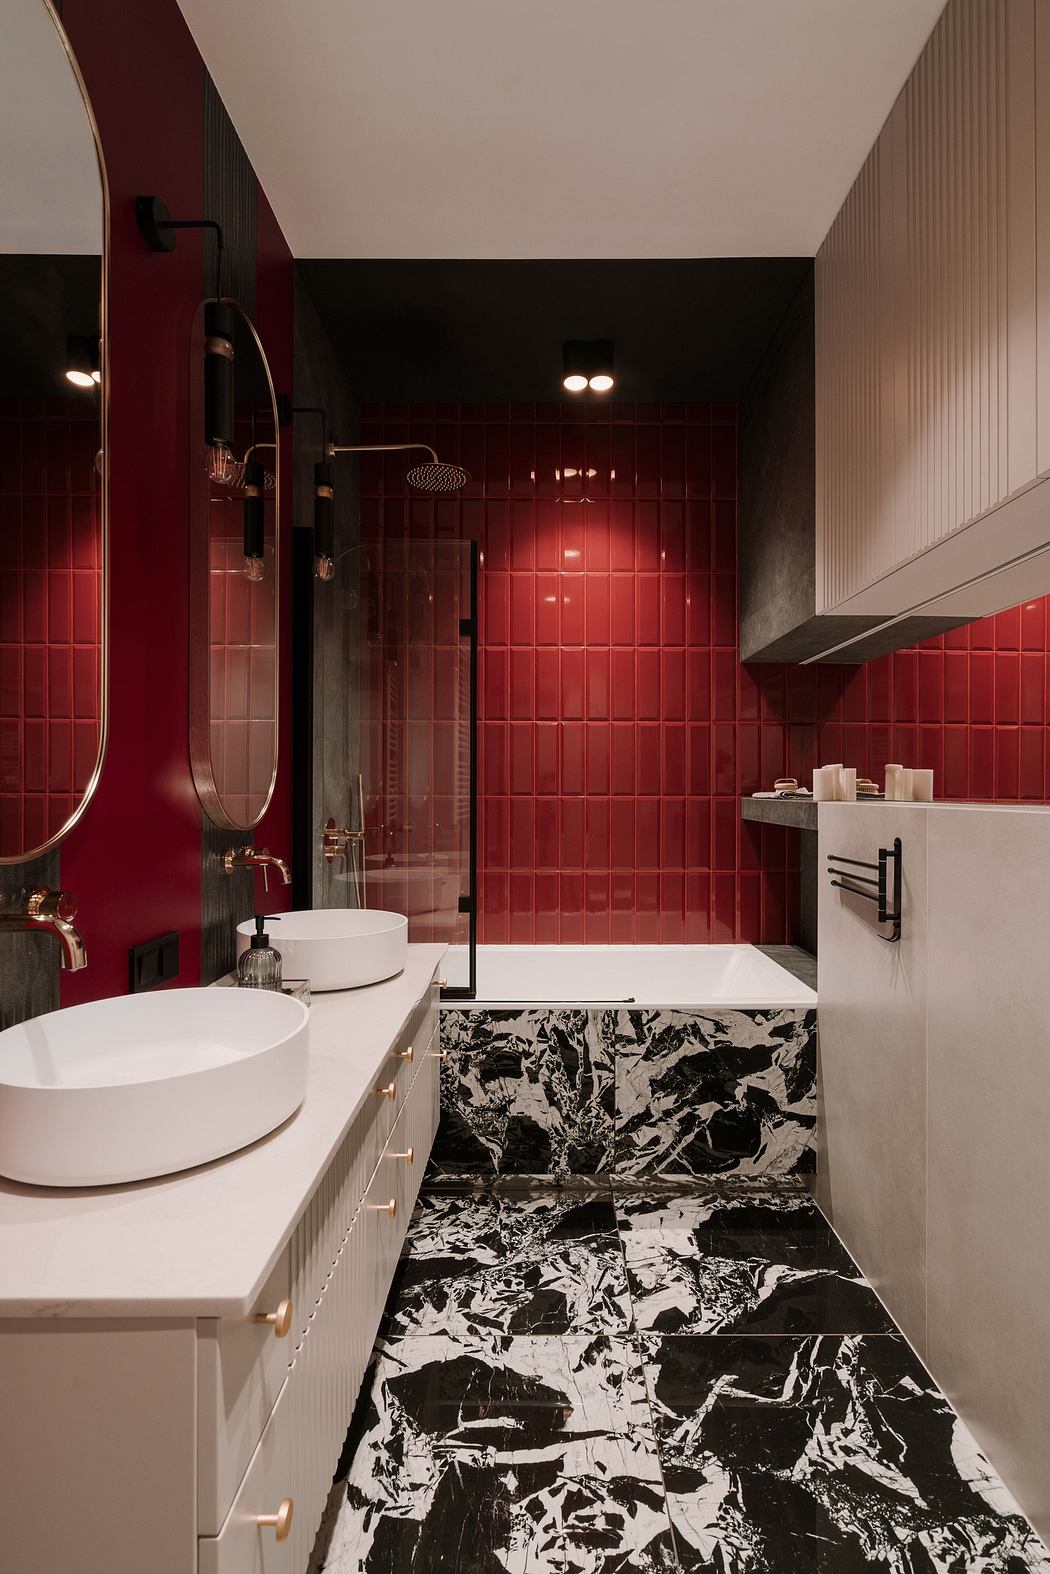 Modern bathroom with red tiled walls, black and white floor, and white fixtures.